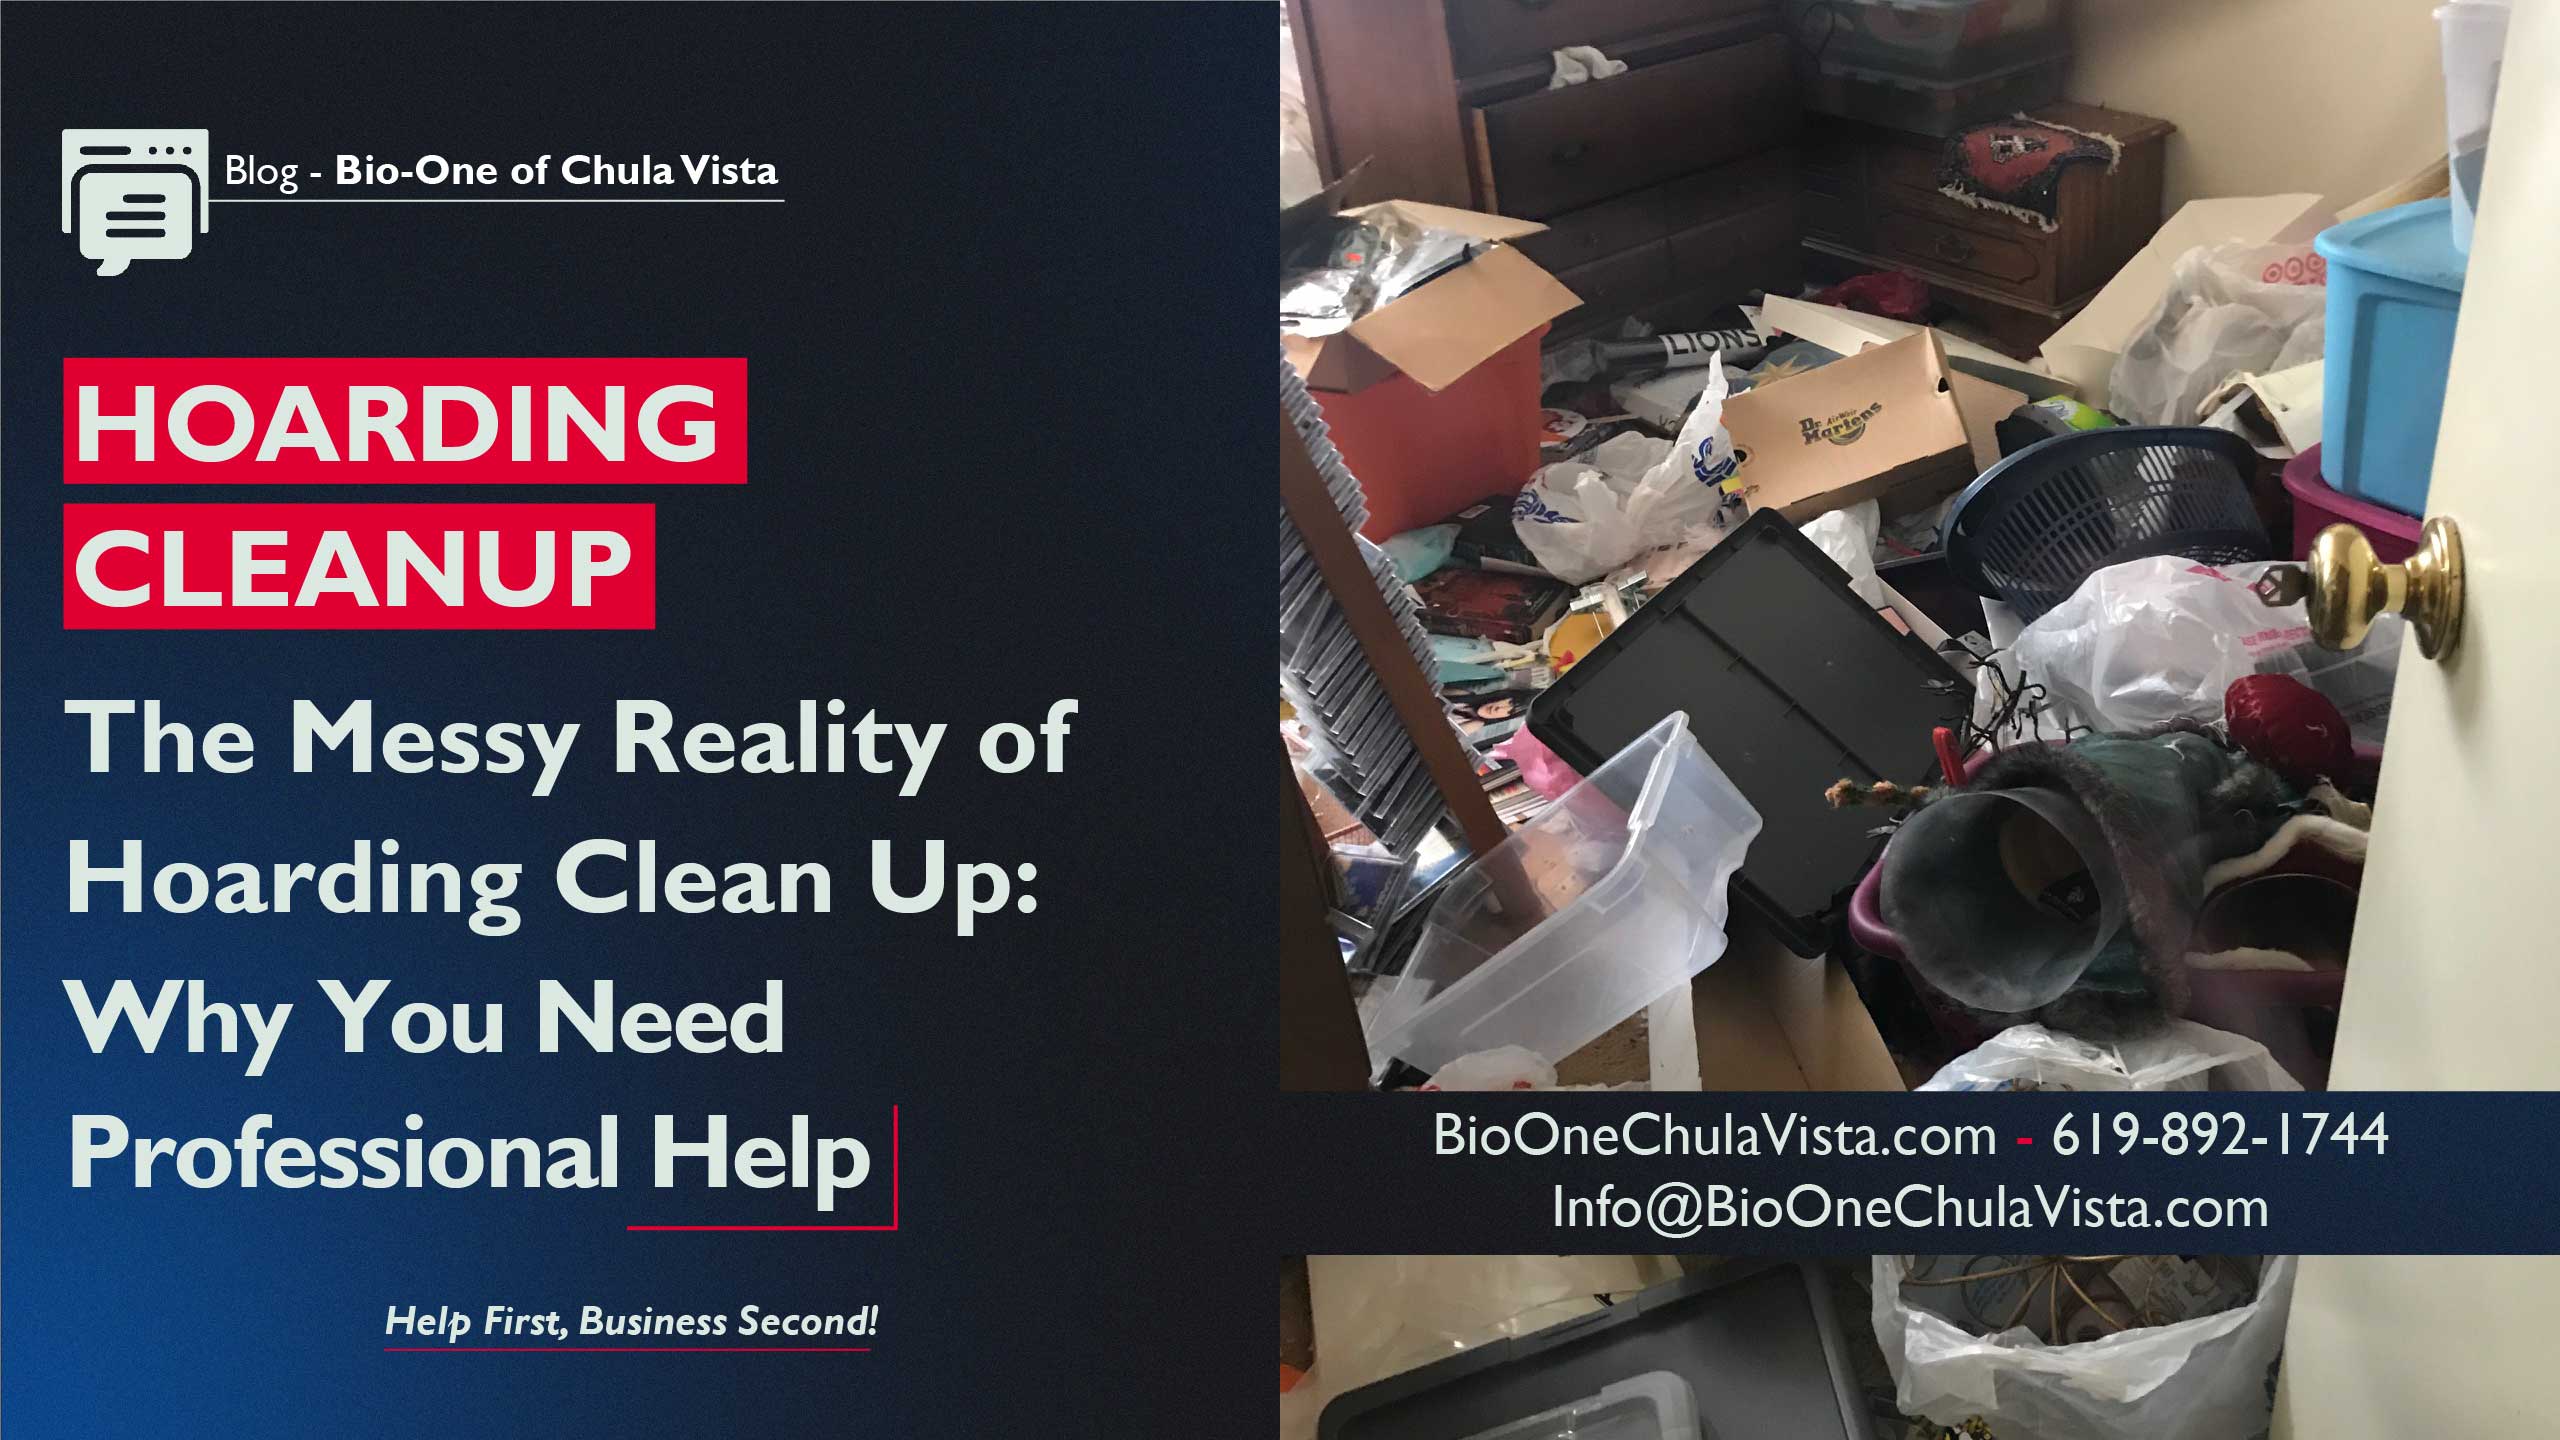 The Messy Reality of Hoarding Clean Up: Why You Need Professional Help